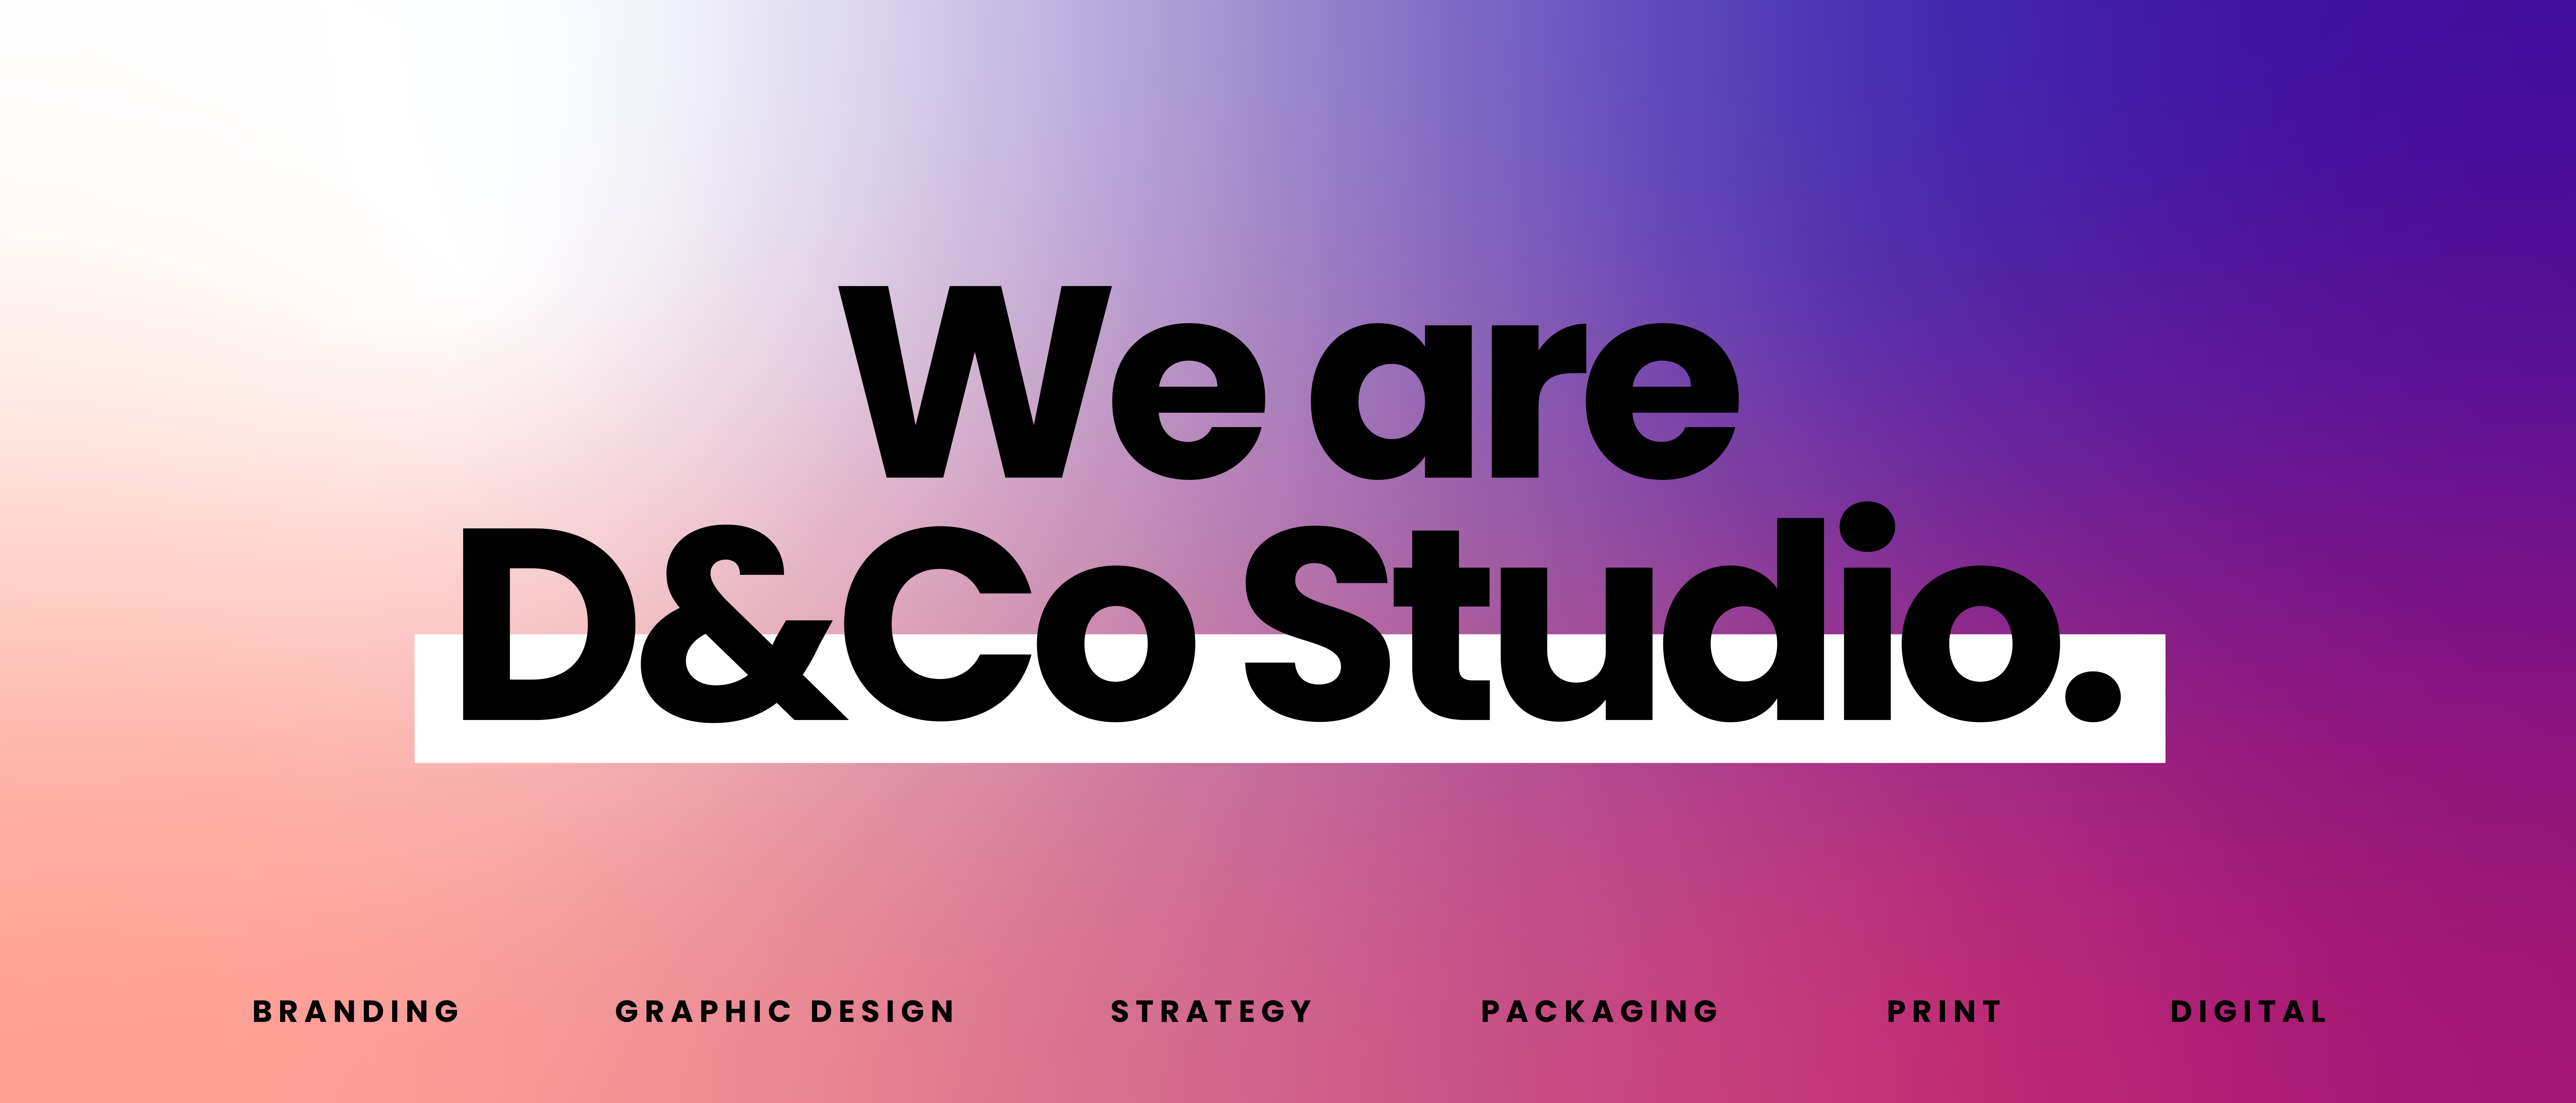 We are D&Co Studio. Branding, Graphic Design, Strategy, Packaging, Print and Digital.